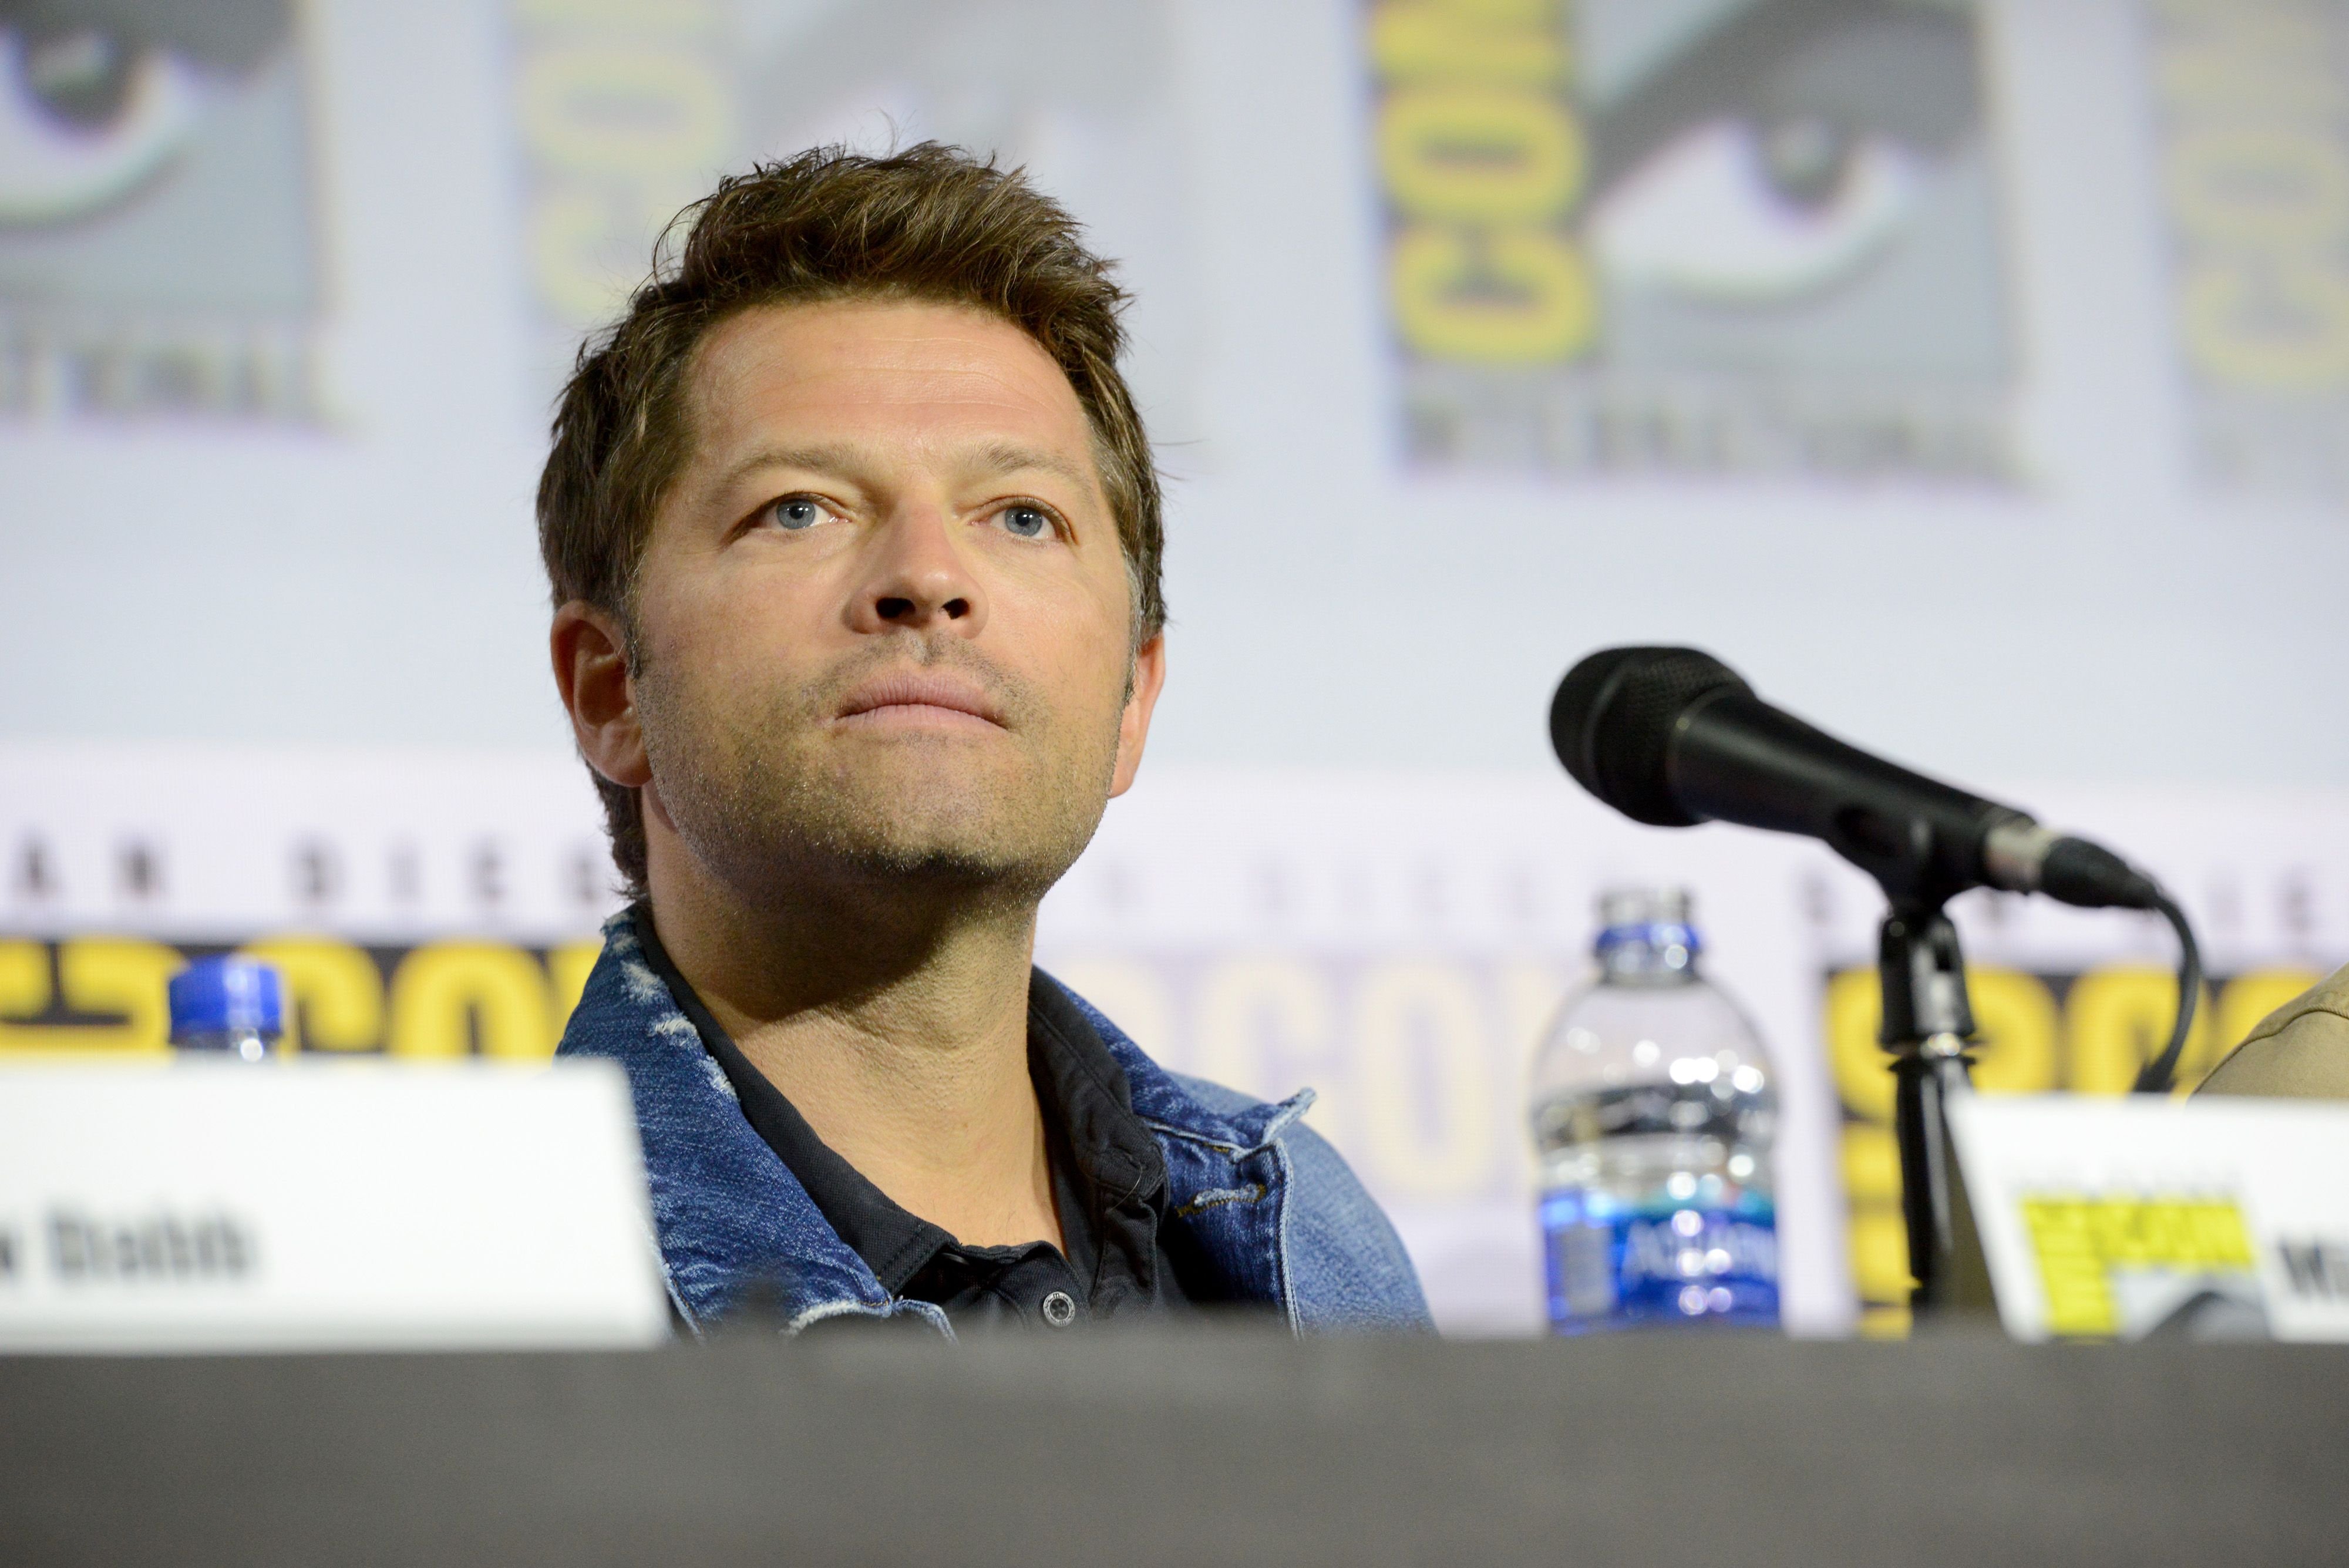  Misha Collins at the "Supernatural" Special Video Presentation and Q&A during 2019 Comic-Con International at San Diego Convention Center on July 21, 2019 in San Diego, California. | Source: Getty Images